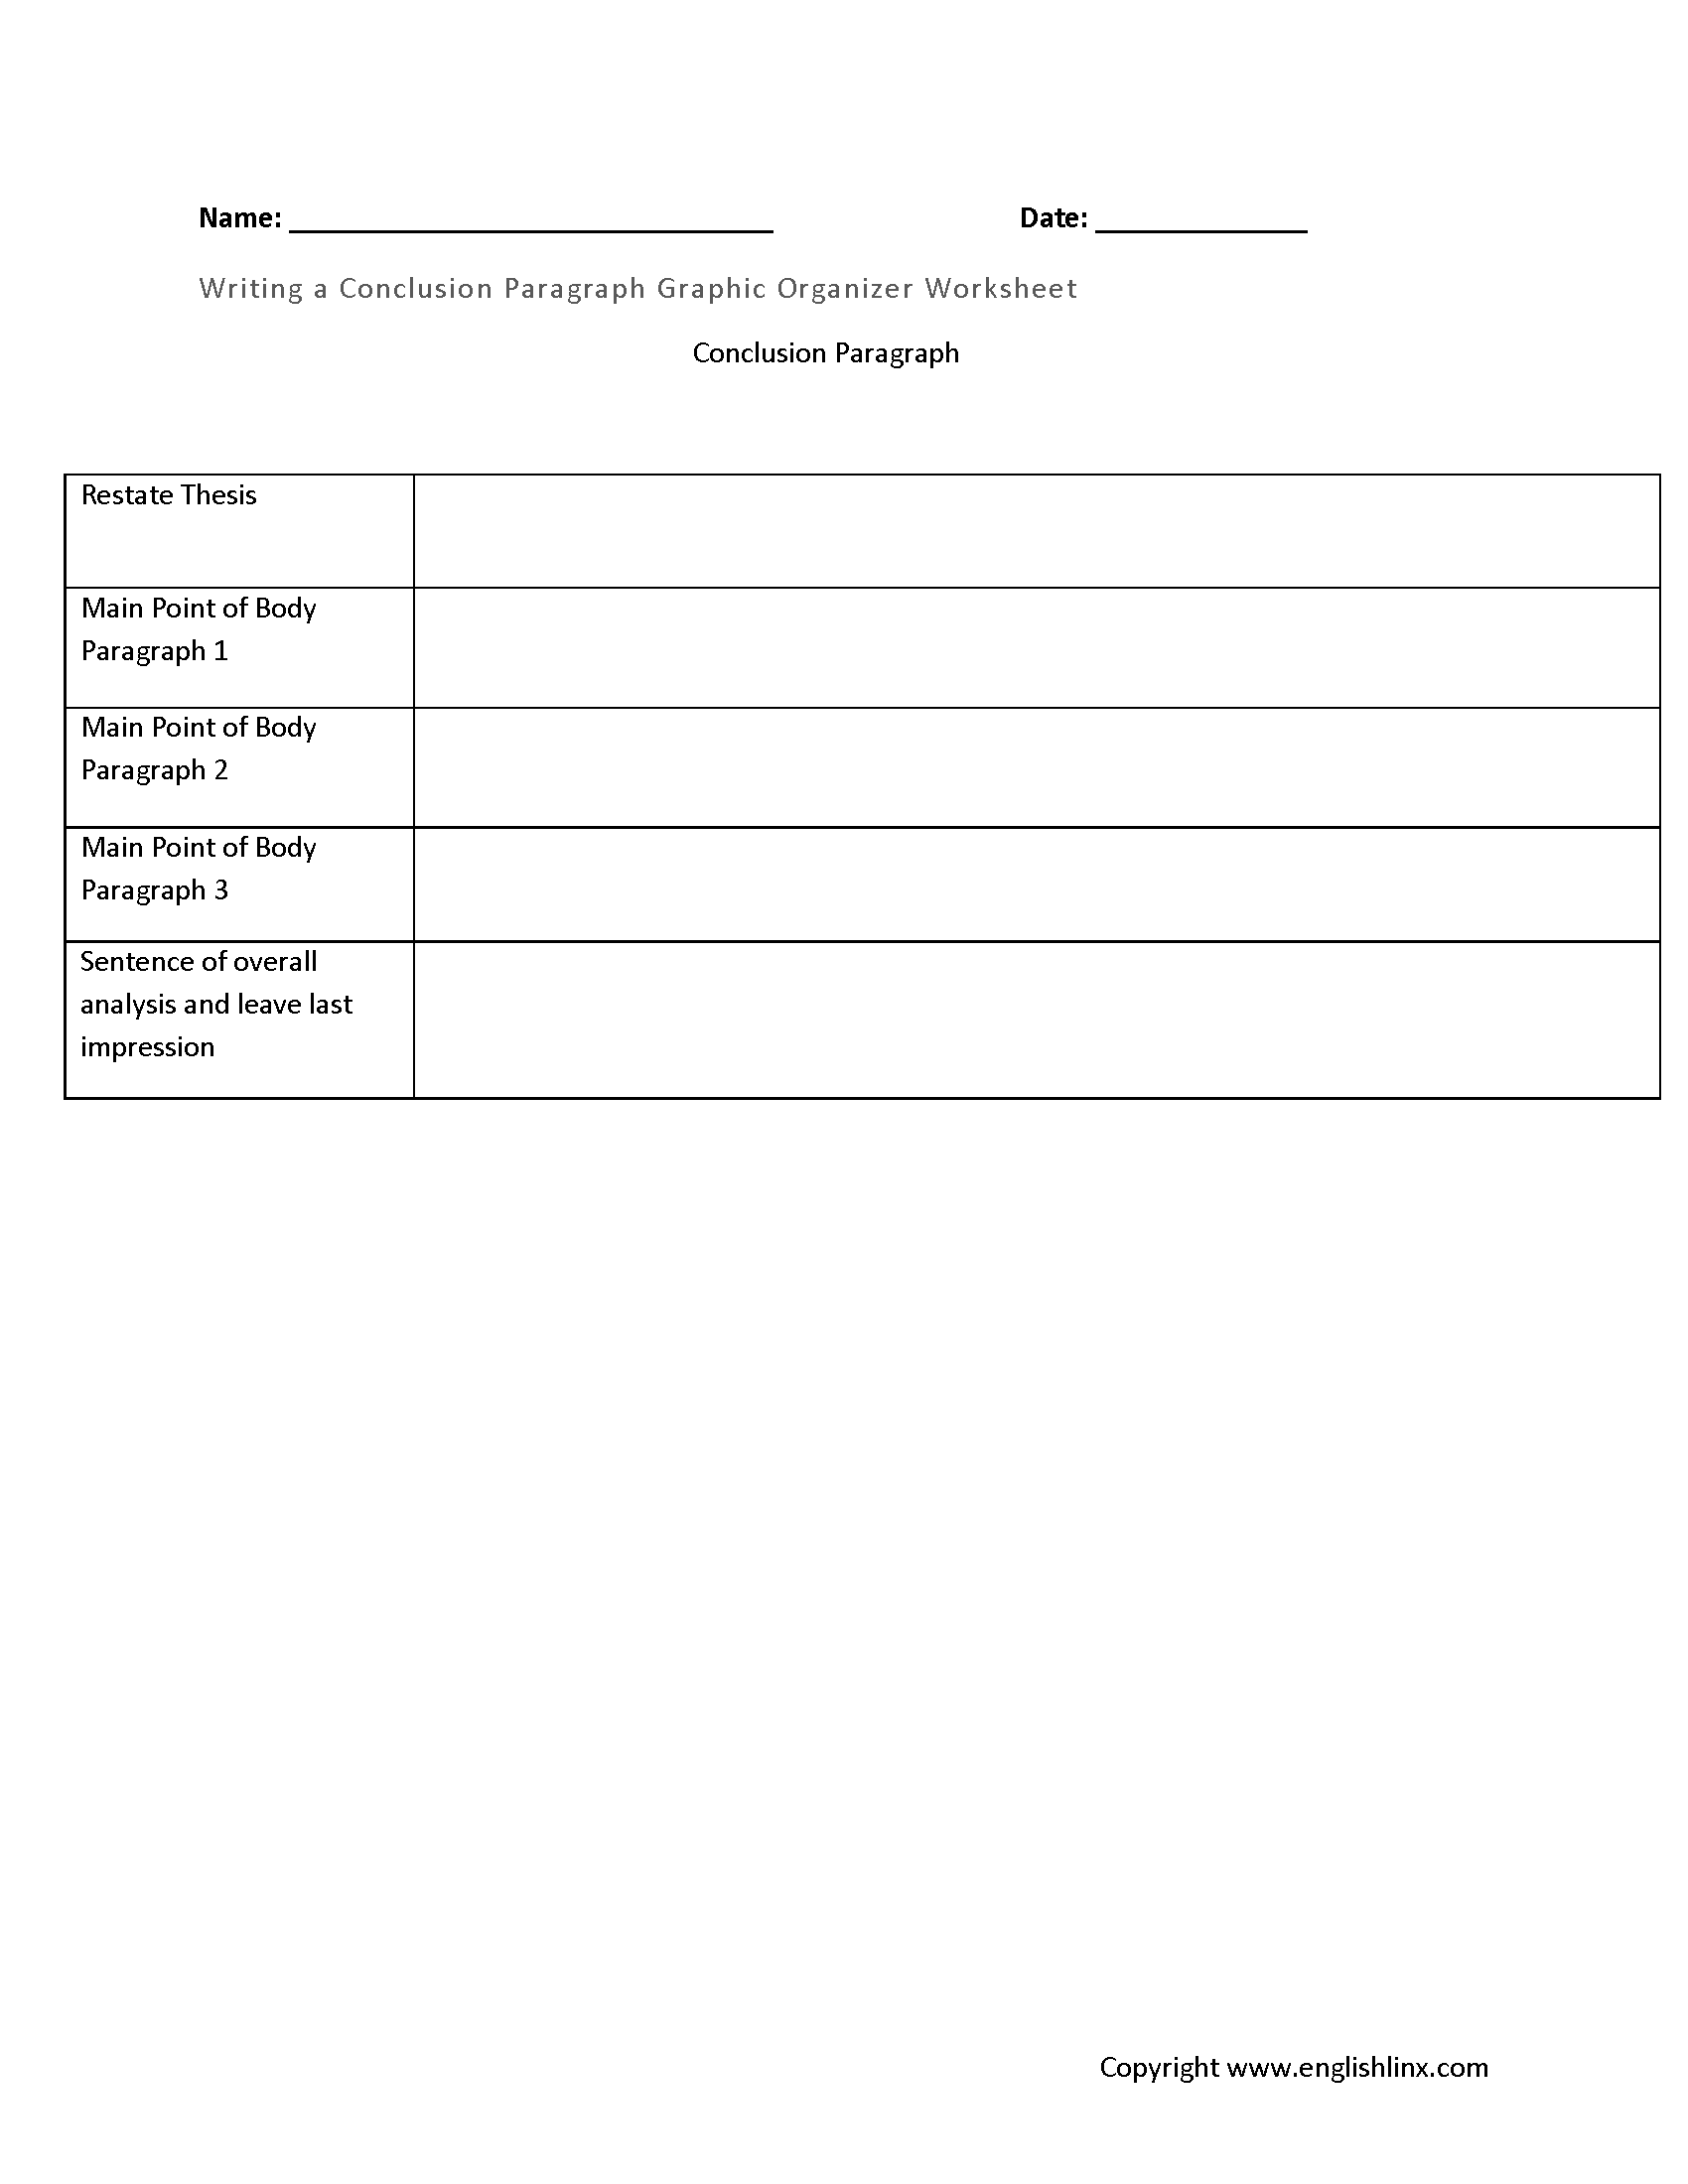 Writing Conclusions Graphic Organizers Worksheet